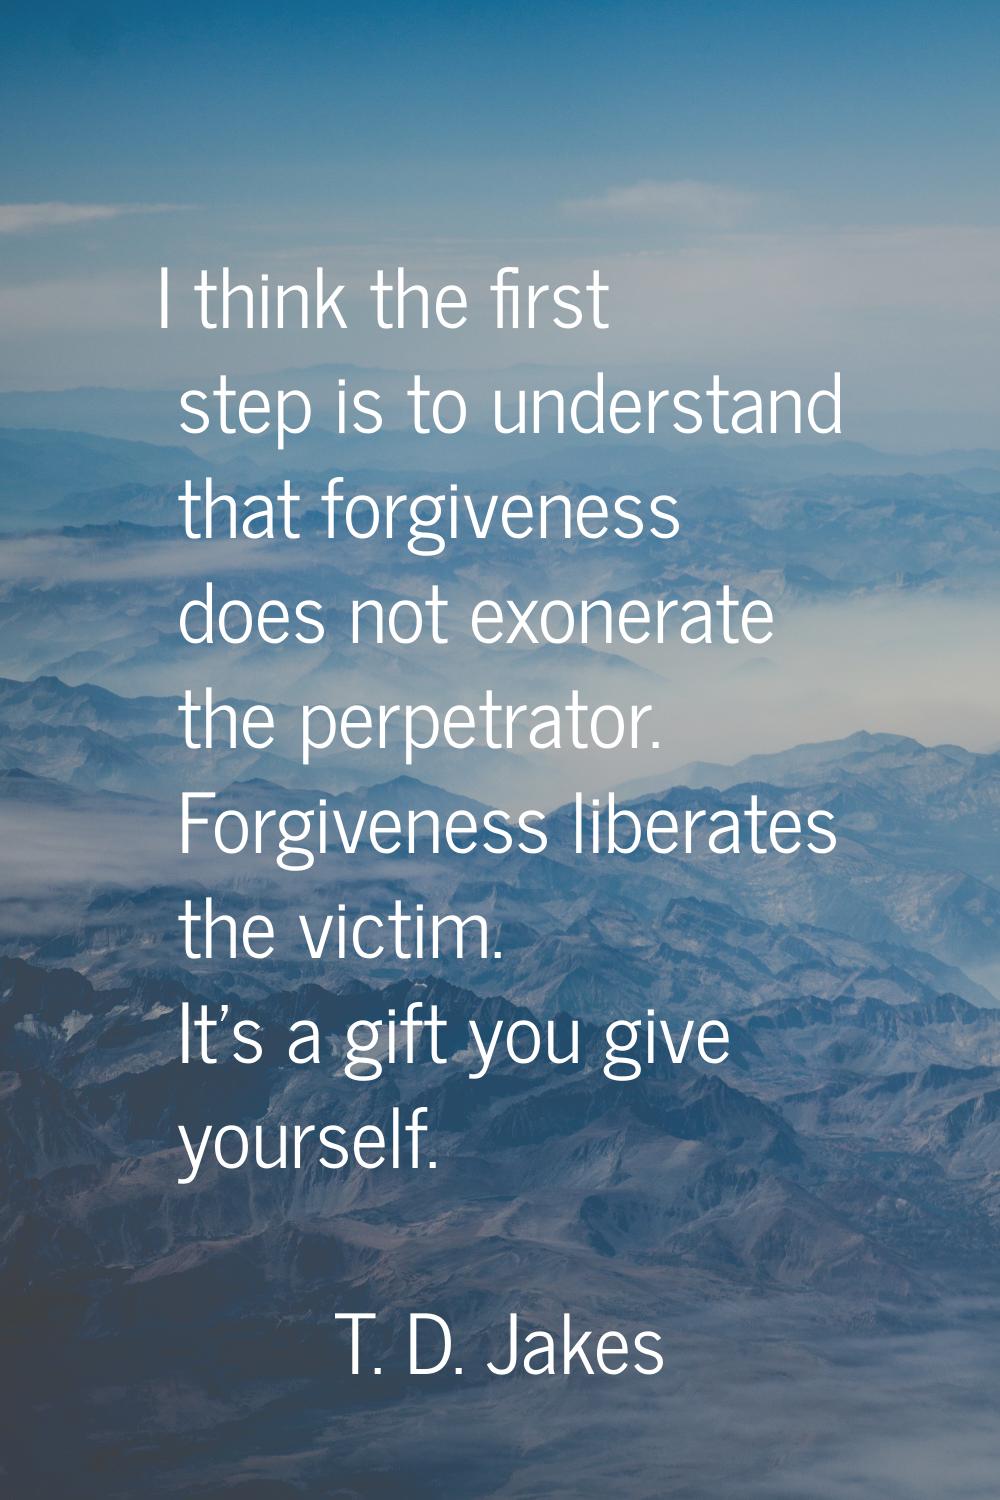 I think the first step is to understand that forgiveness does not exonerate the perpetrator. Forgiv